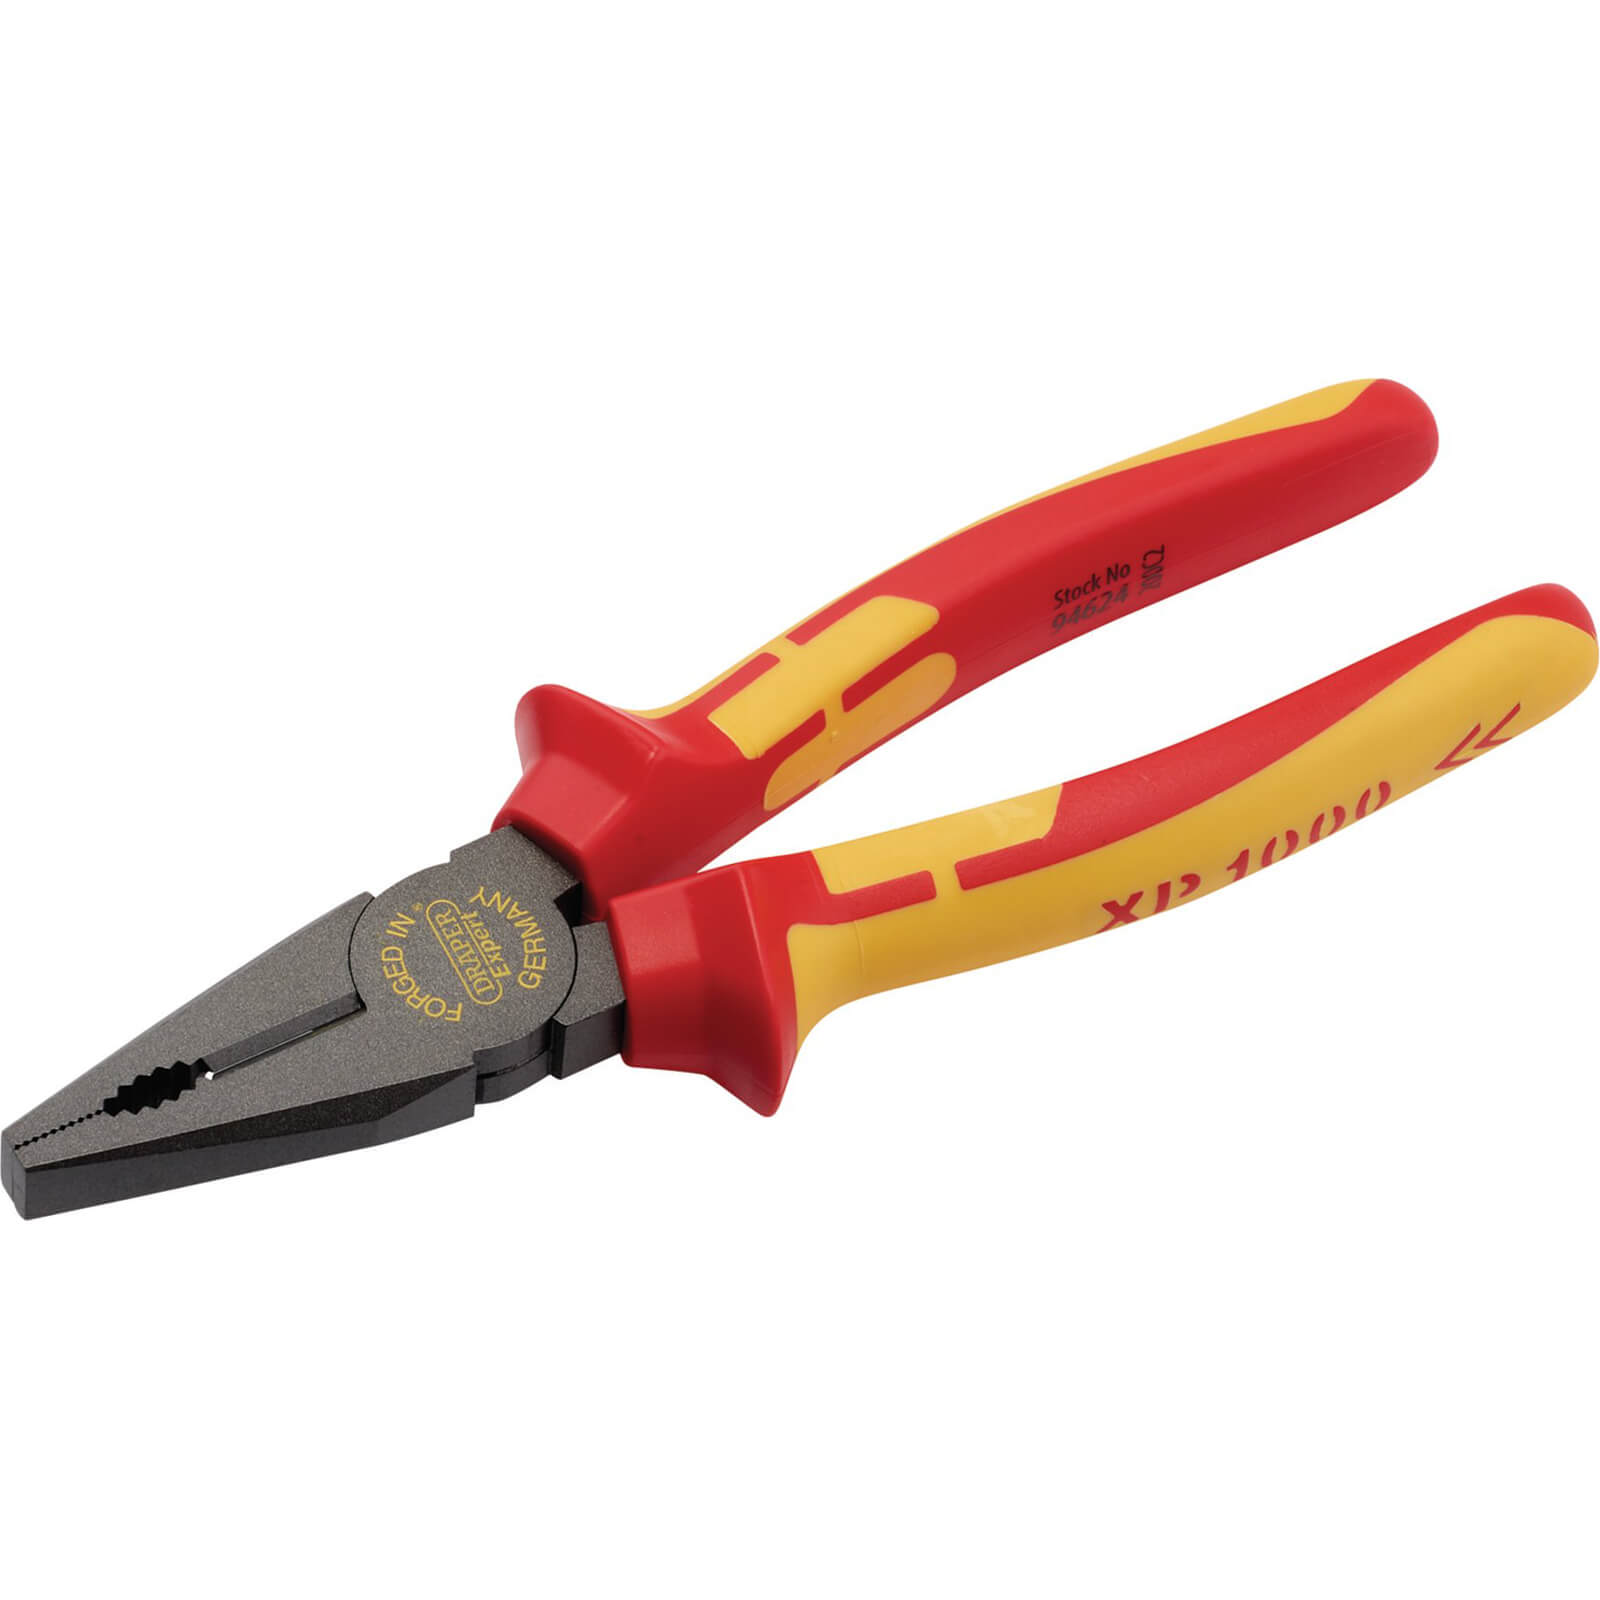 Draper XP1000 VDE Insulated Combination Pliers 200mm